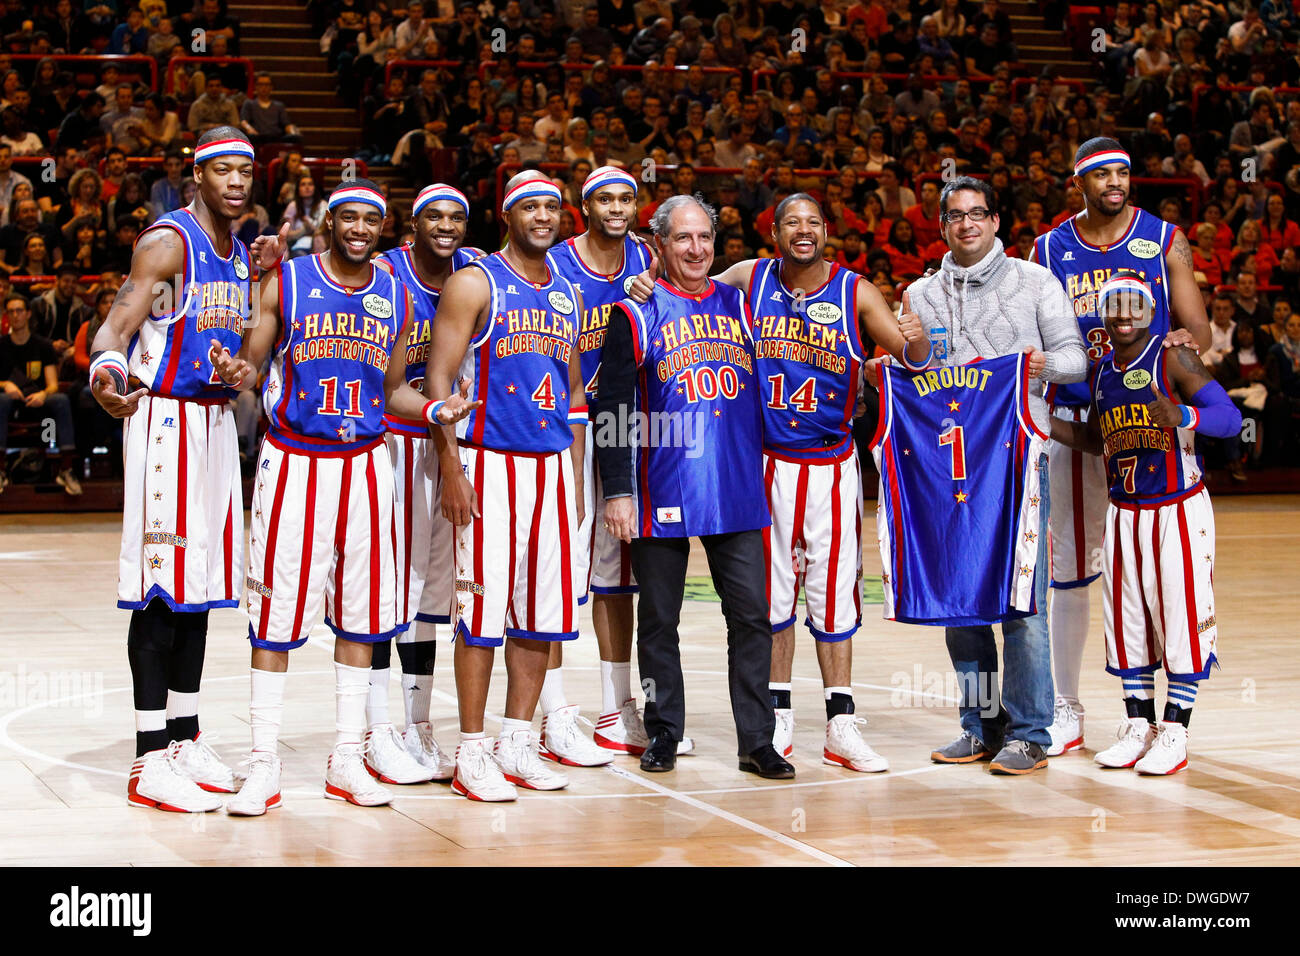 Paris, France. 22nd Feb, 2014. Exhibition basketball match staged by the  Harlem Globetrotters. Picture shows Team introductions © Action Plus  Sports/Alamy Live News Stock Photo - Alamy